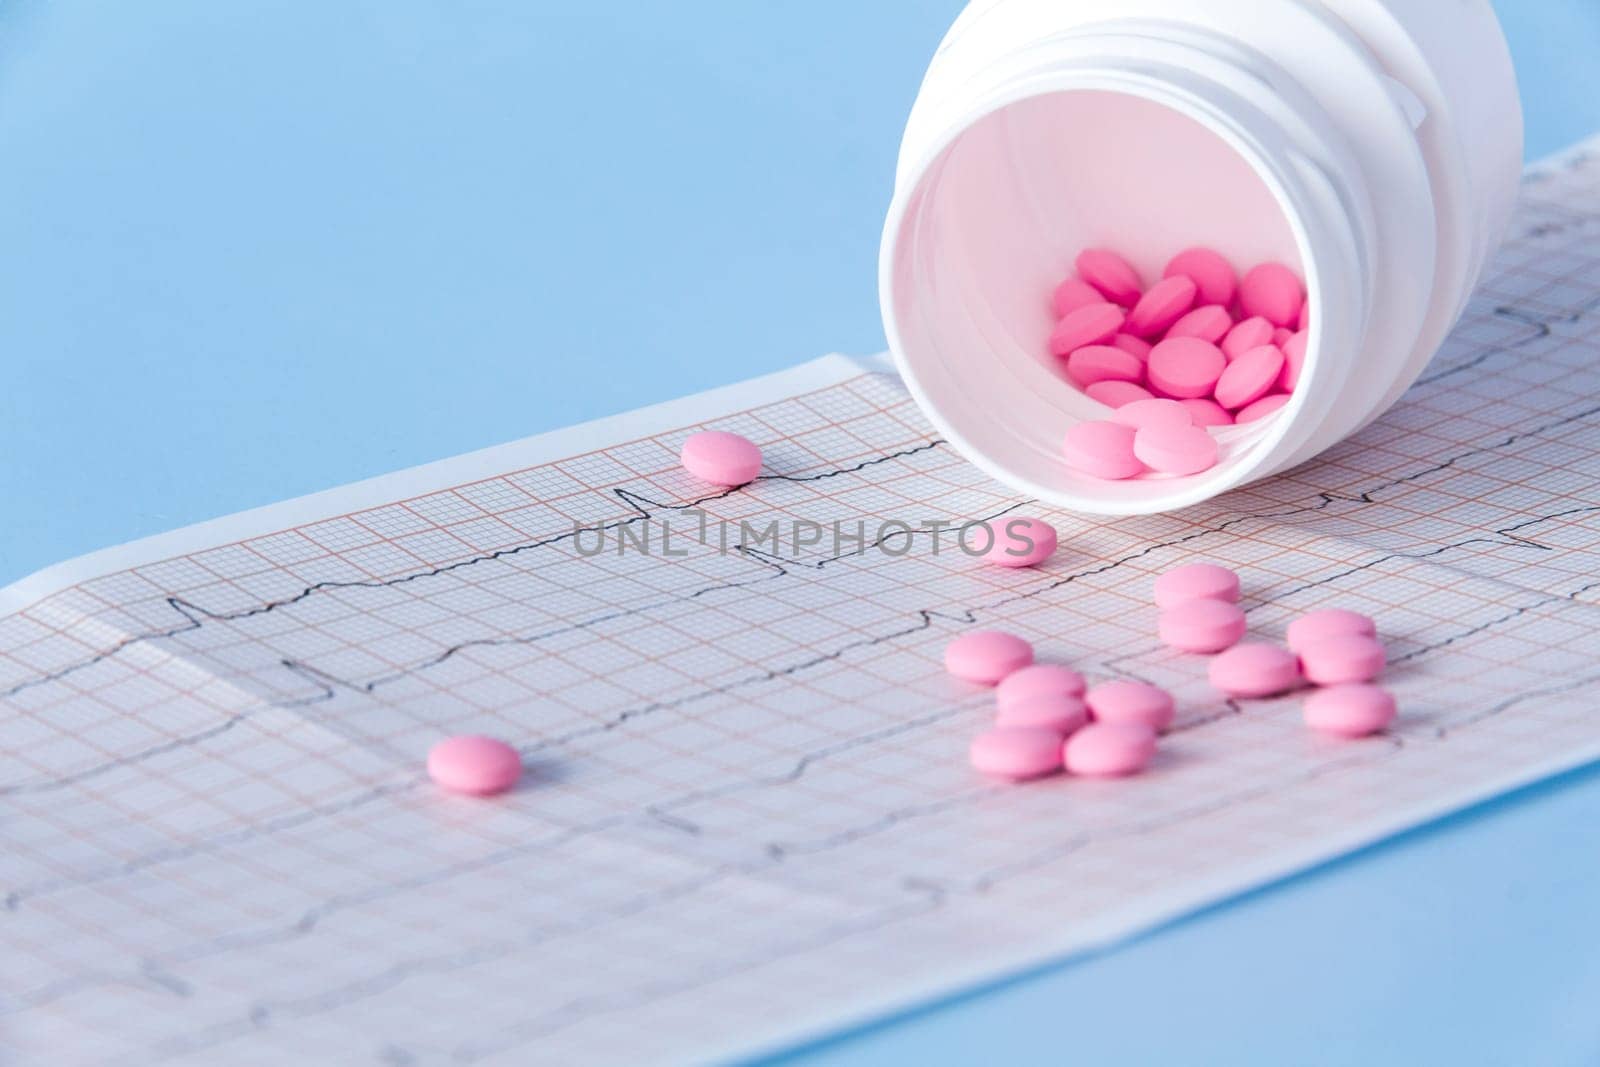 A large handful of pink pills poured out of a white jar on an electrocardiogram of the heart, on a blue background. The concept of a healthy lifestyle and timely medical examination